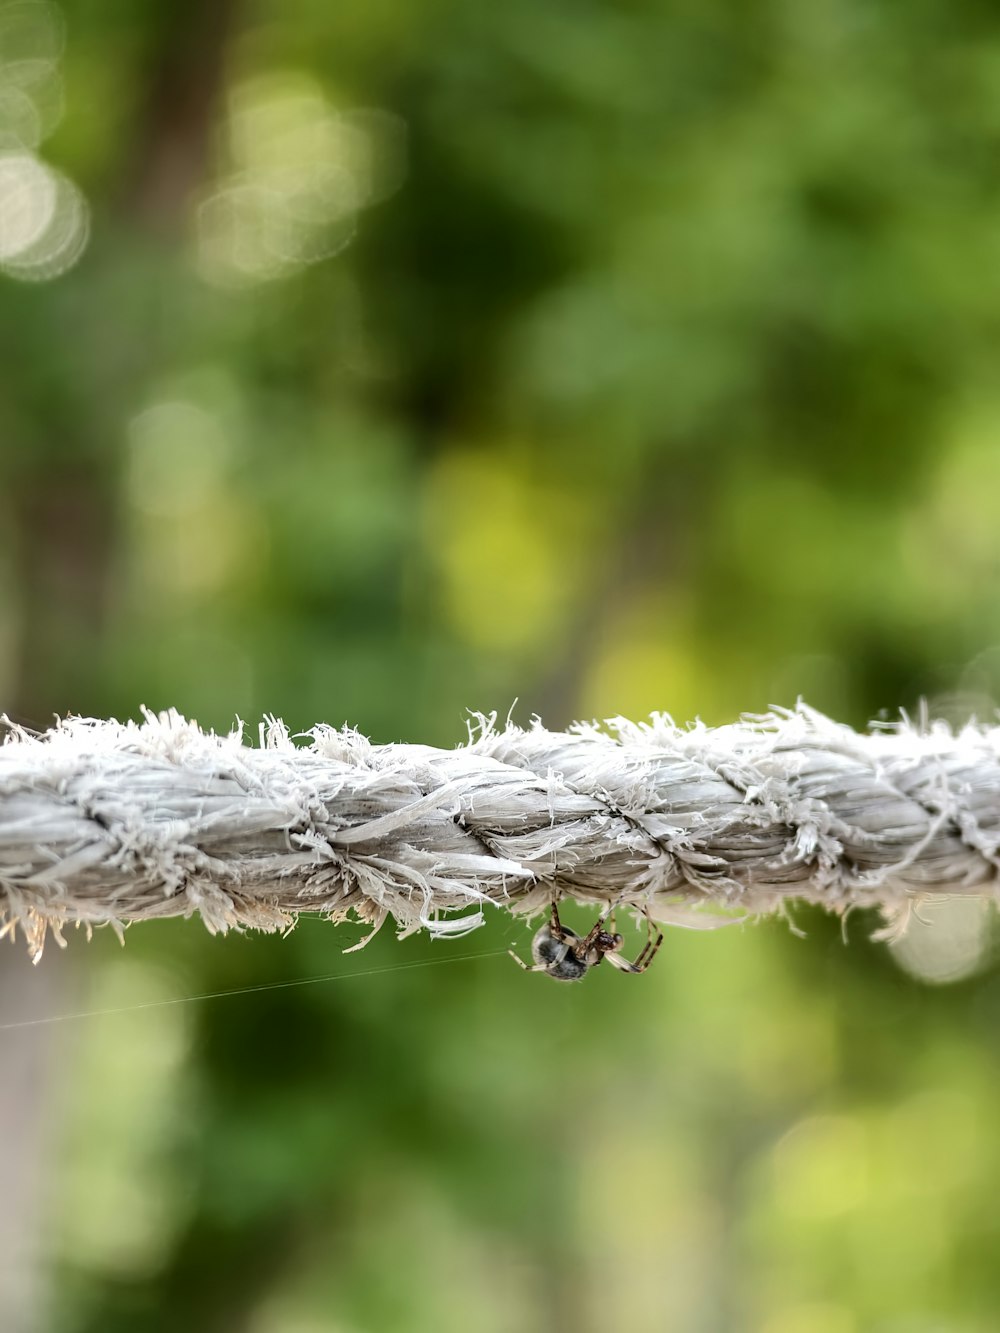 a close up of a rope with a bug on it